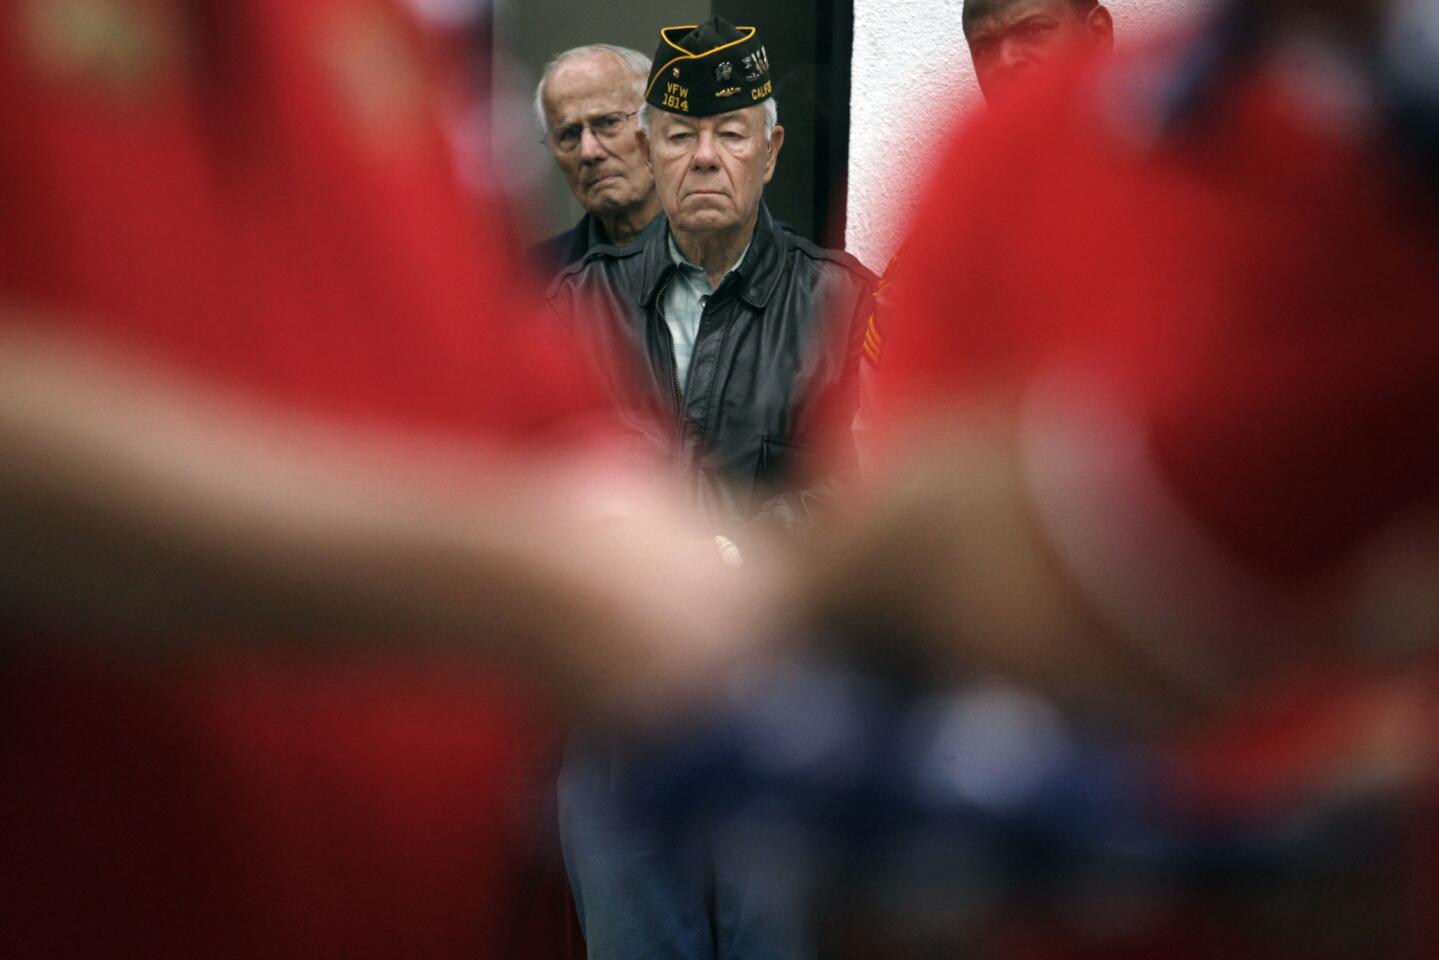 Vietnam veteran Jerry Peterson sits in silence during the flag folding ceremony for Welcome Home Vietnam Veterans Day, which took place at Ocean View and Honolulu Aves. in Montrose on Saturday, April 13, 2013.